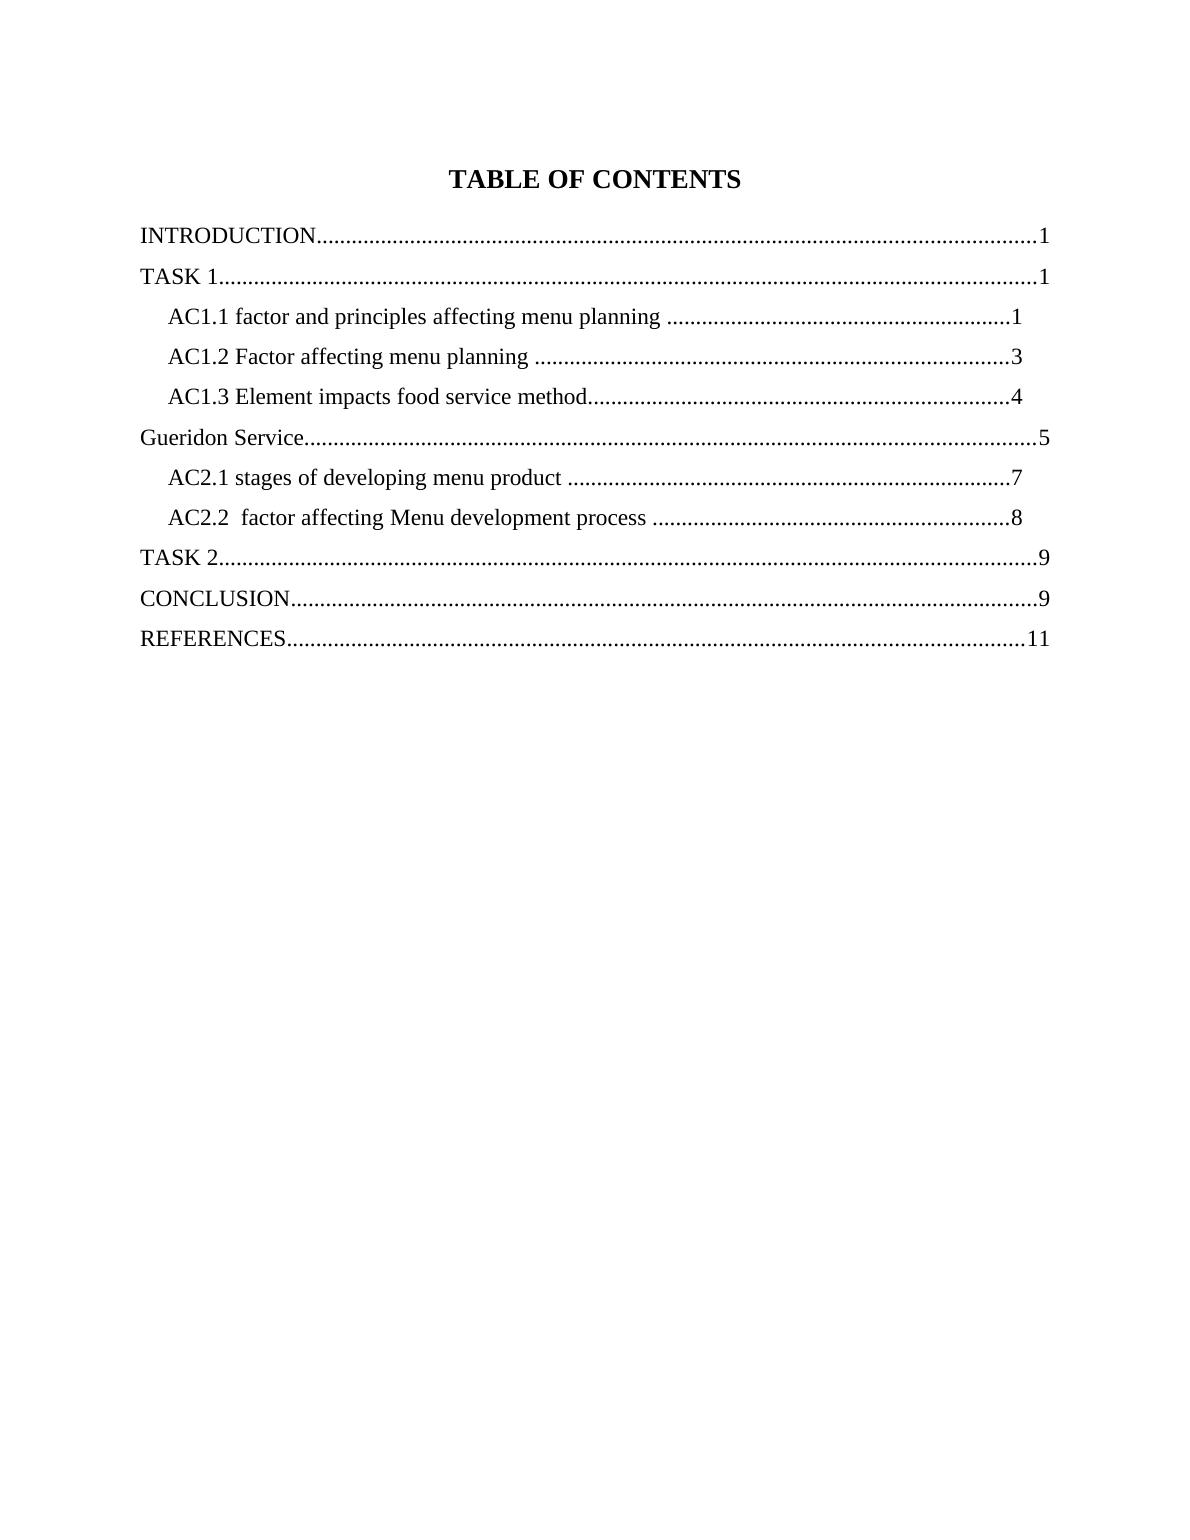 TABLE OF CONTENTS INTRODUCTION Menu Planning and Product Development TABLE OF CONTENTS_2